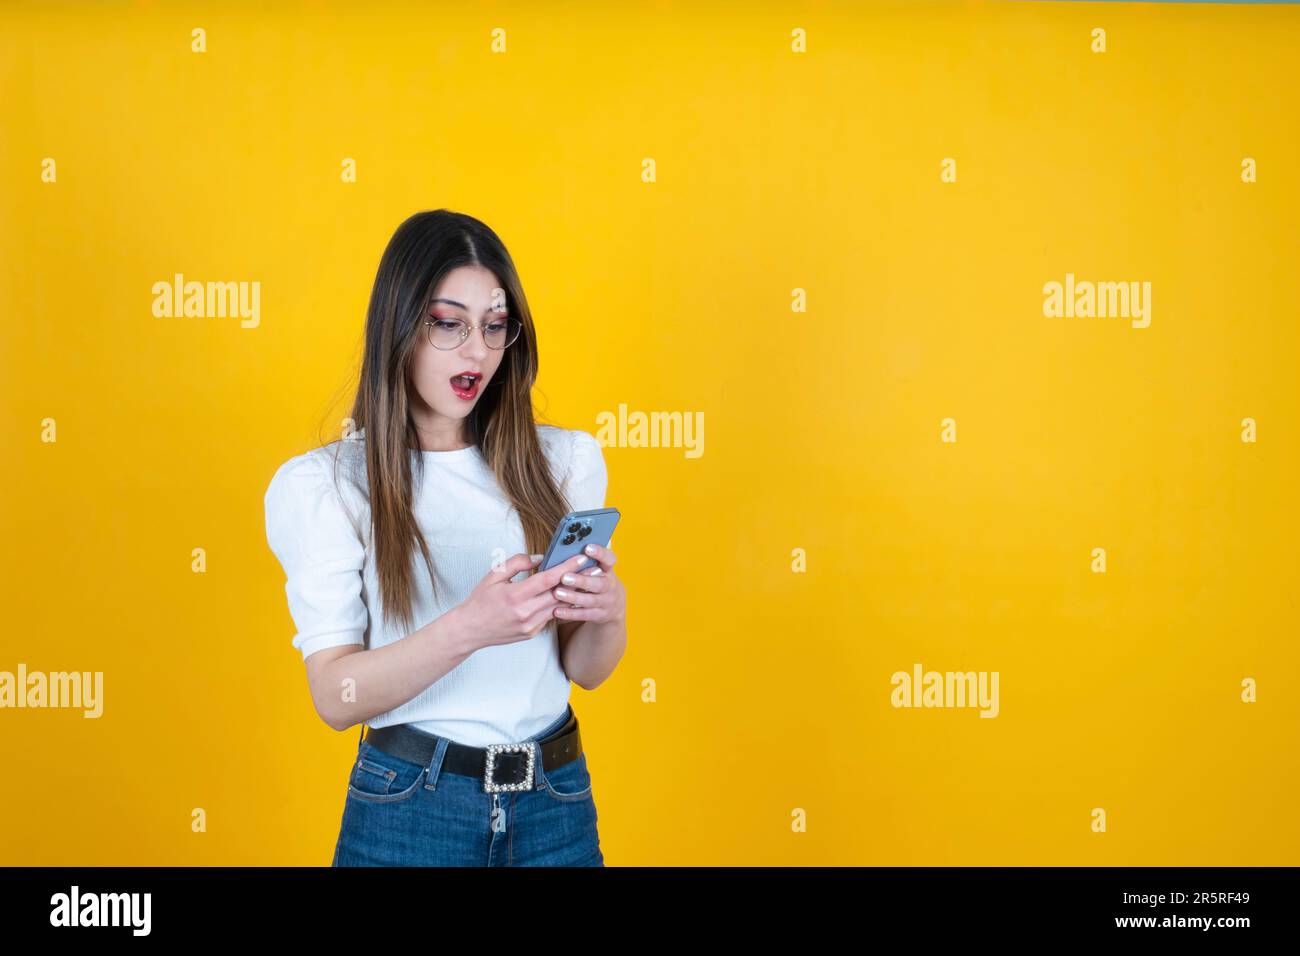 shocked woman. Surprised caucasian girl holding and using smartphone. Browsing social media, reading a message, emotional young lady facial expression Stock Photo